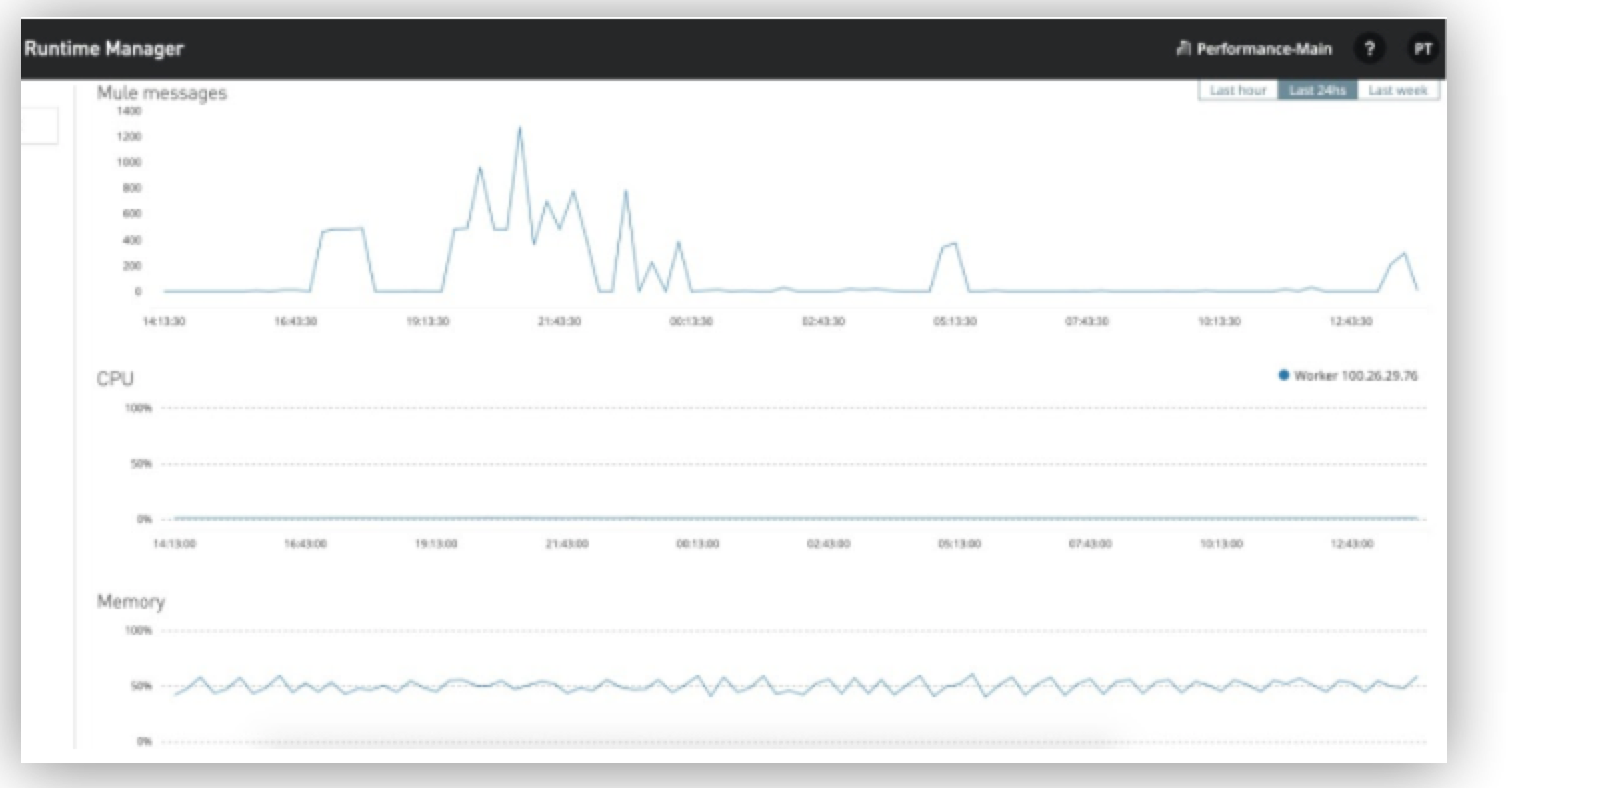 Runtime Manager Dashboard